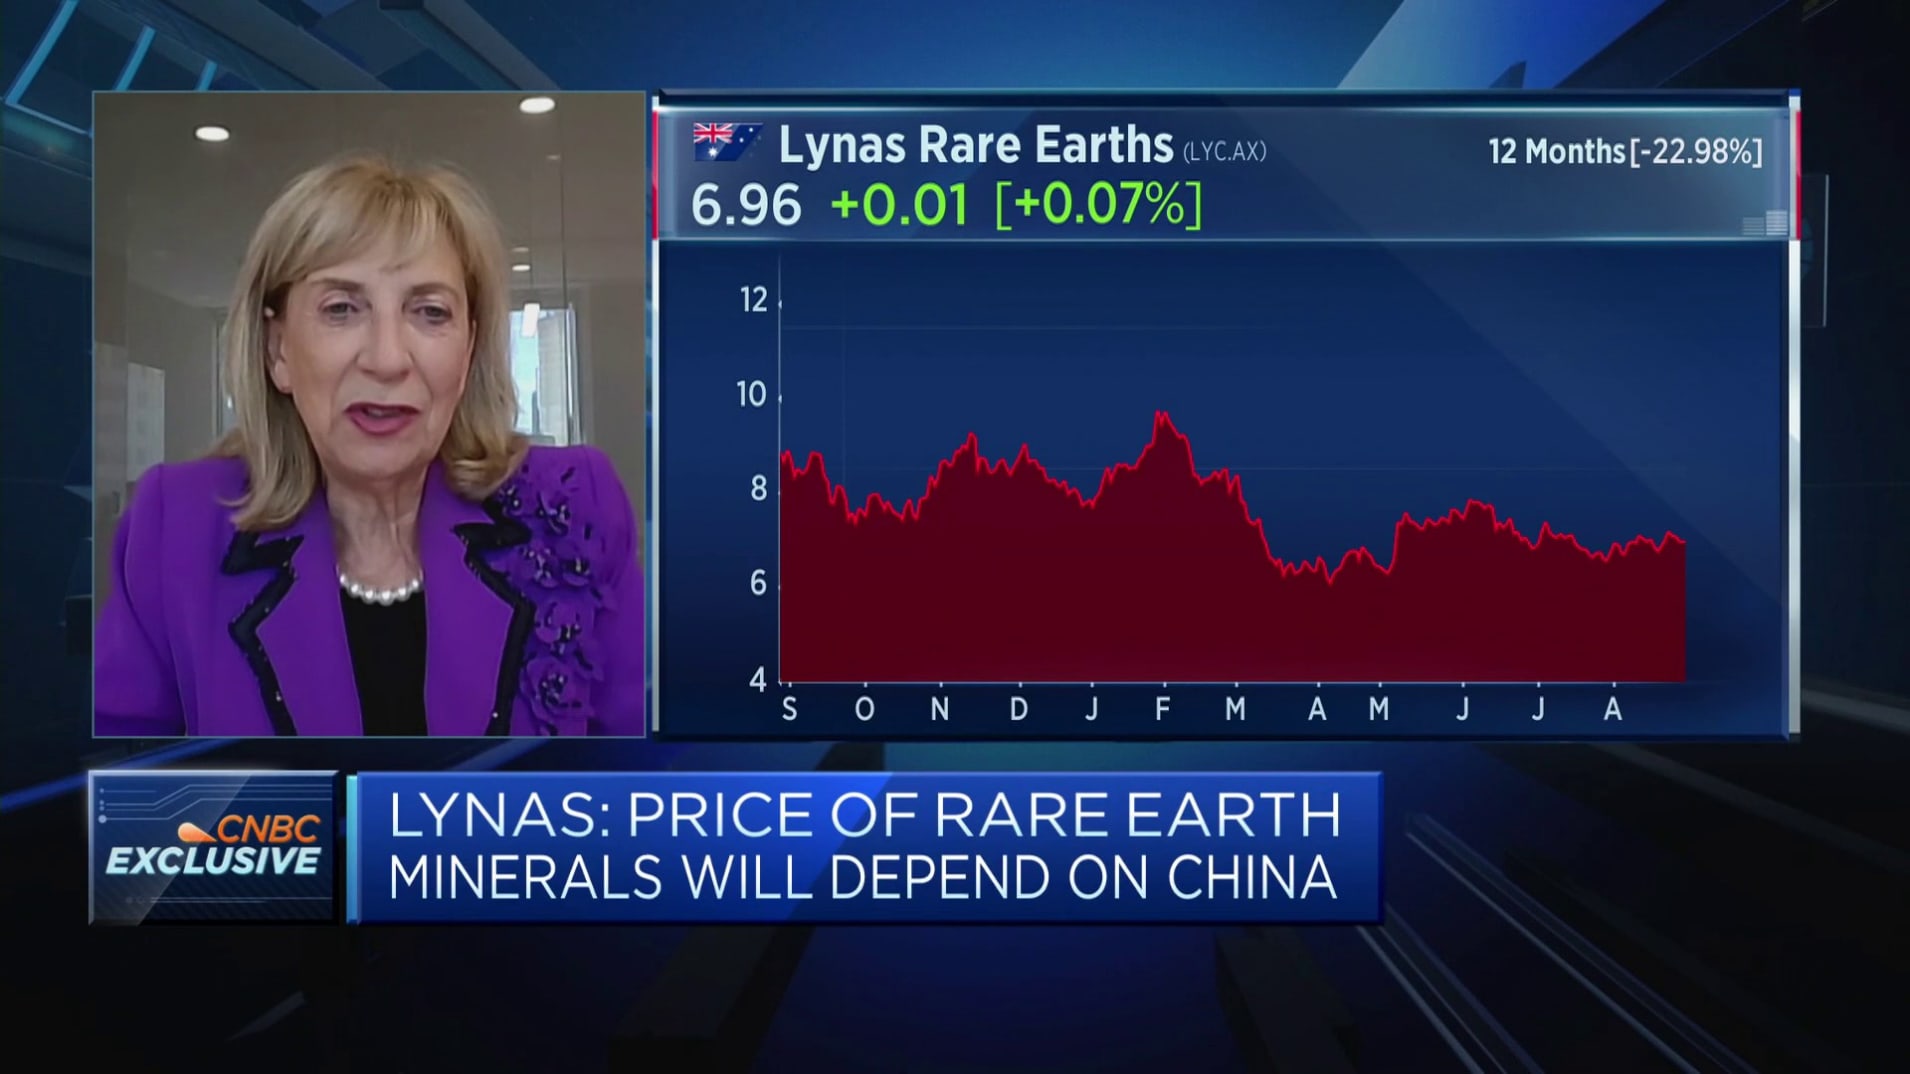 Having a 'robust' rare earths processing ecosystem outside China is  important for us: Lynas Rare Earths